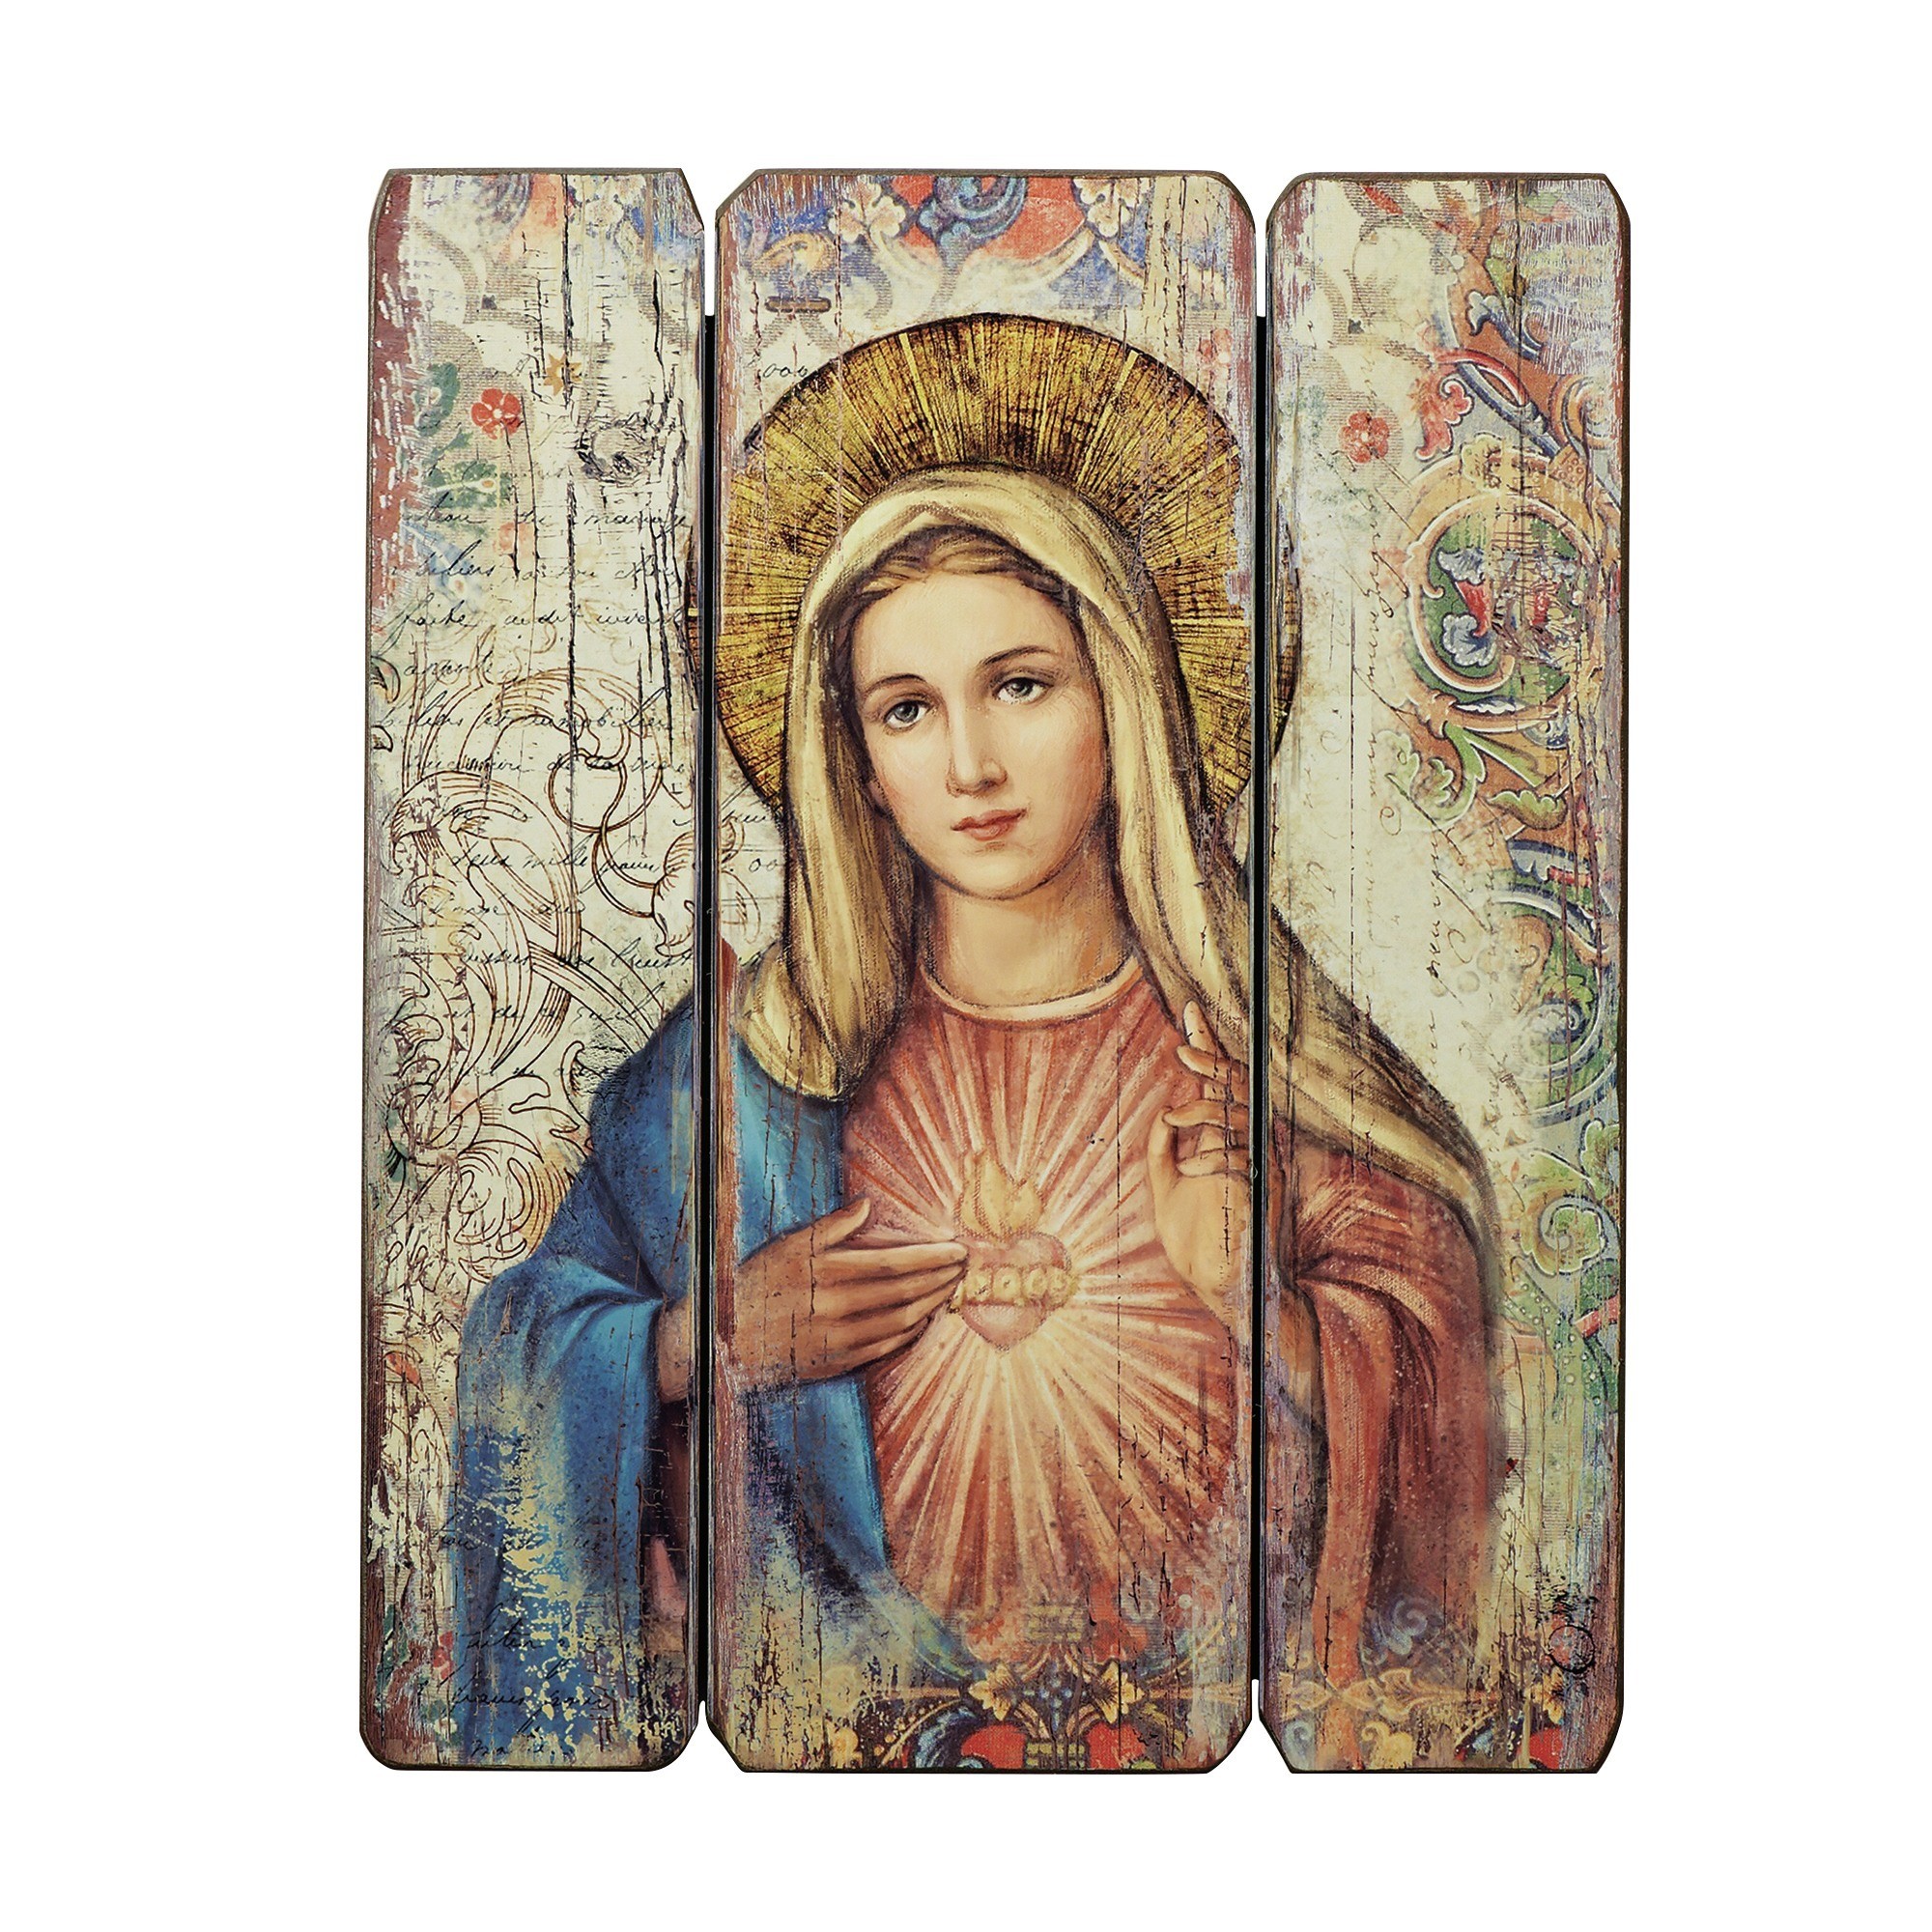 2000x2000 Immaculate Heart of Mary Wall Plaque